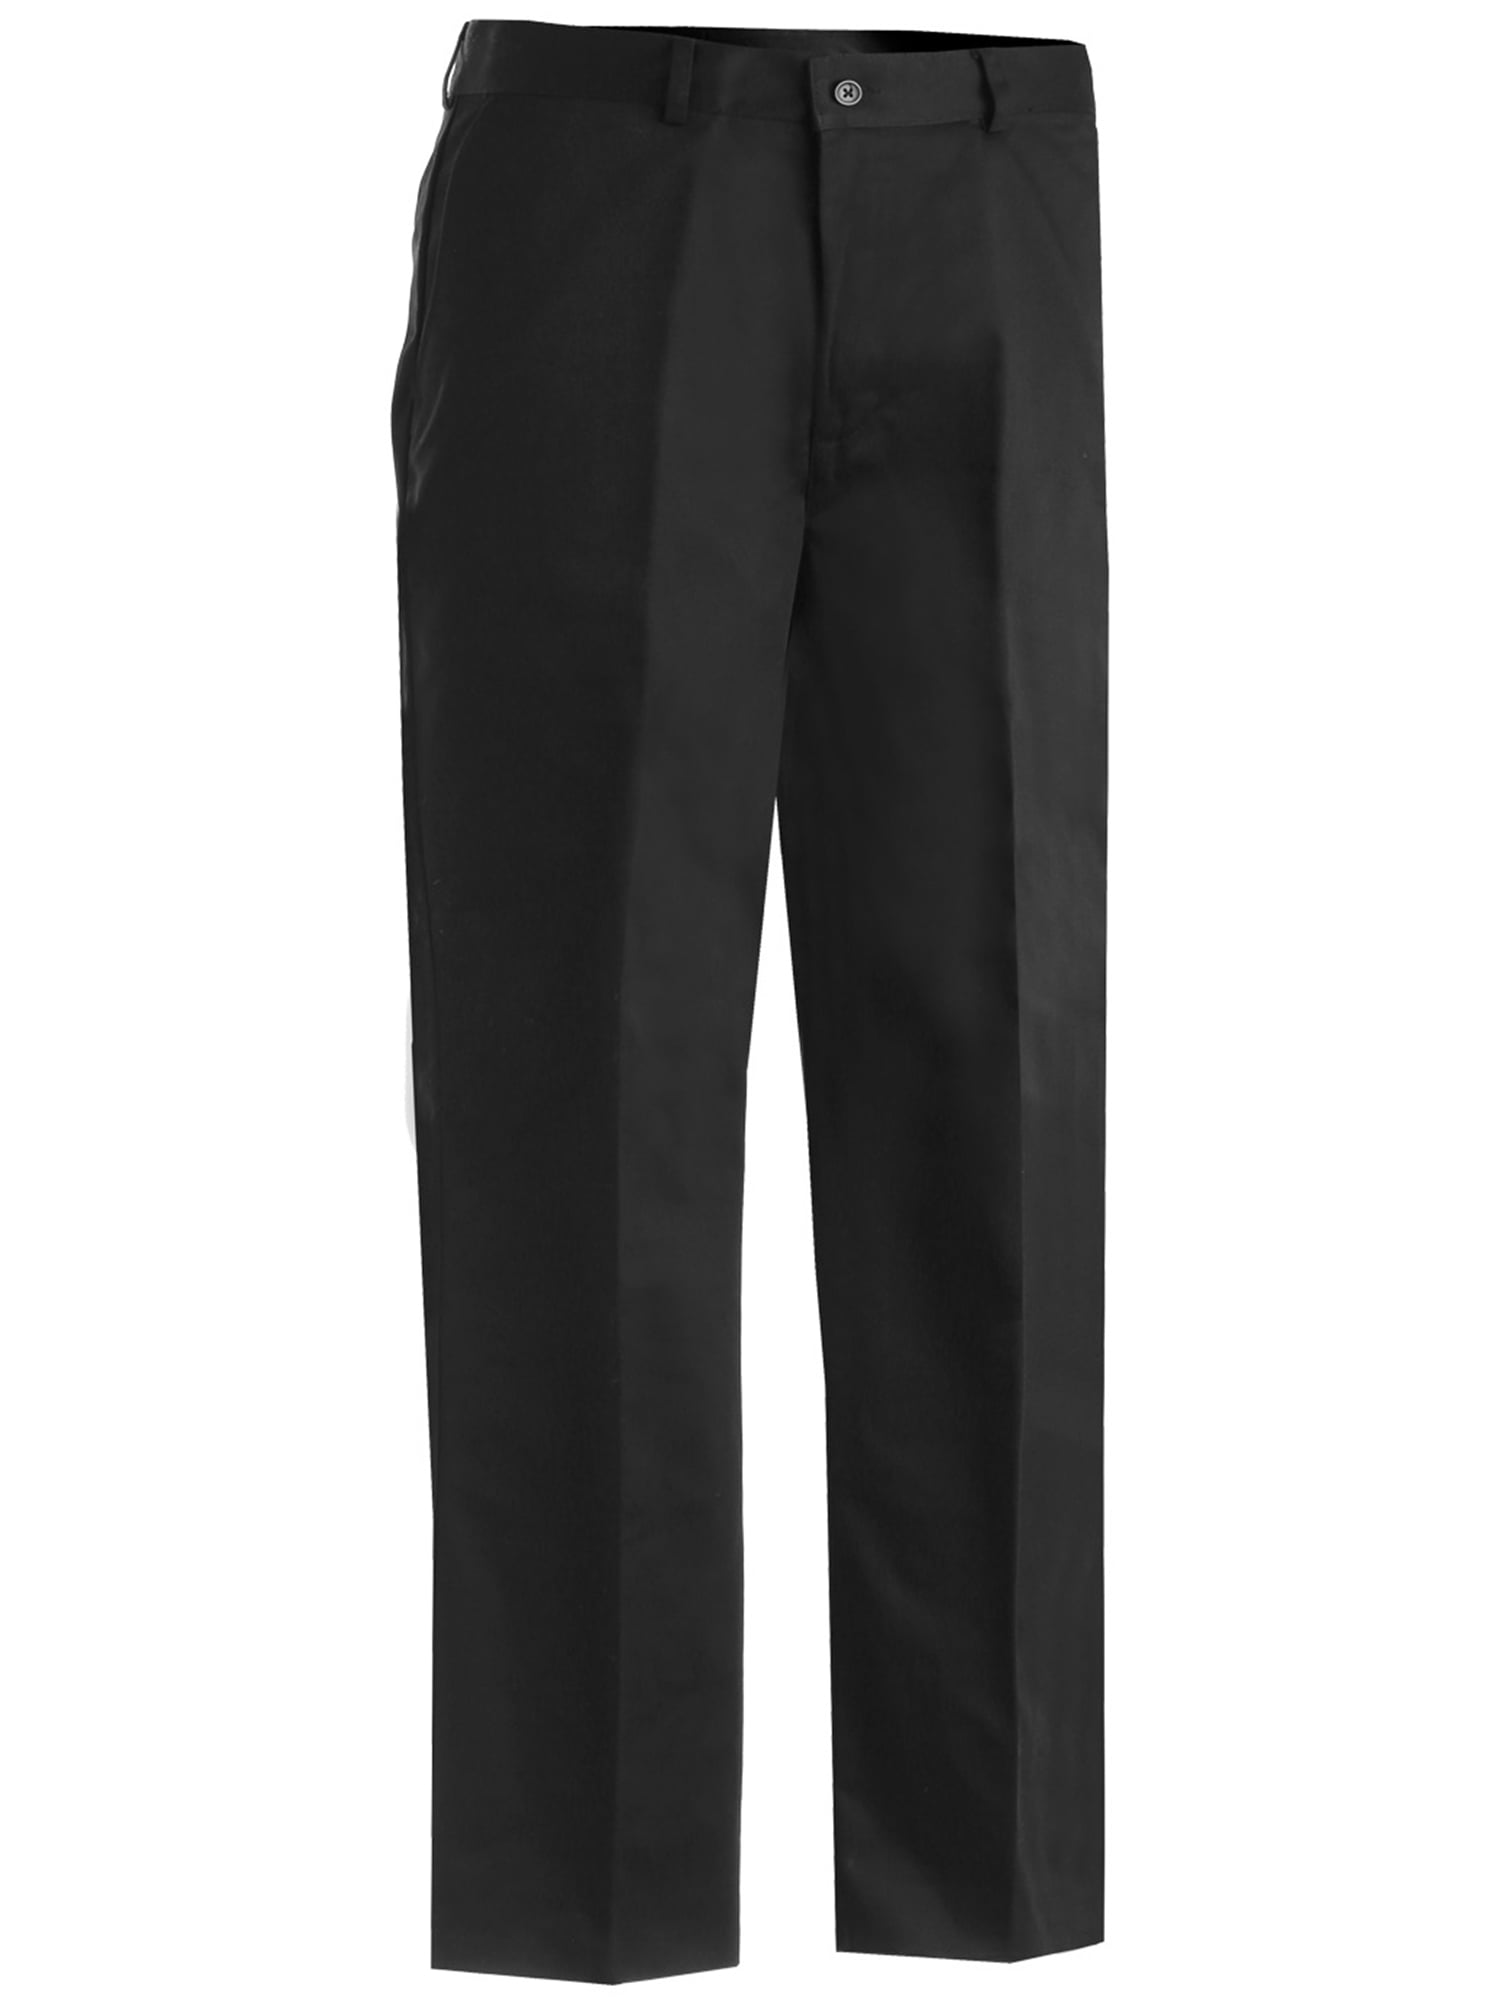 Edwards Garment Mens Casual Chino Blend Easy Fit Pant_BLACK_54 UL